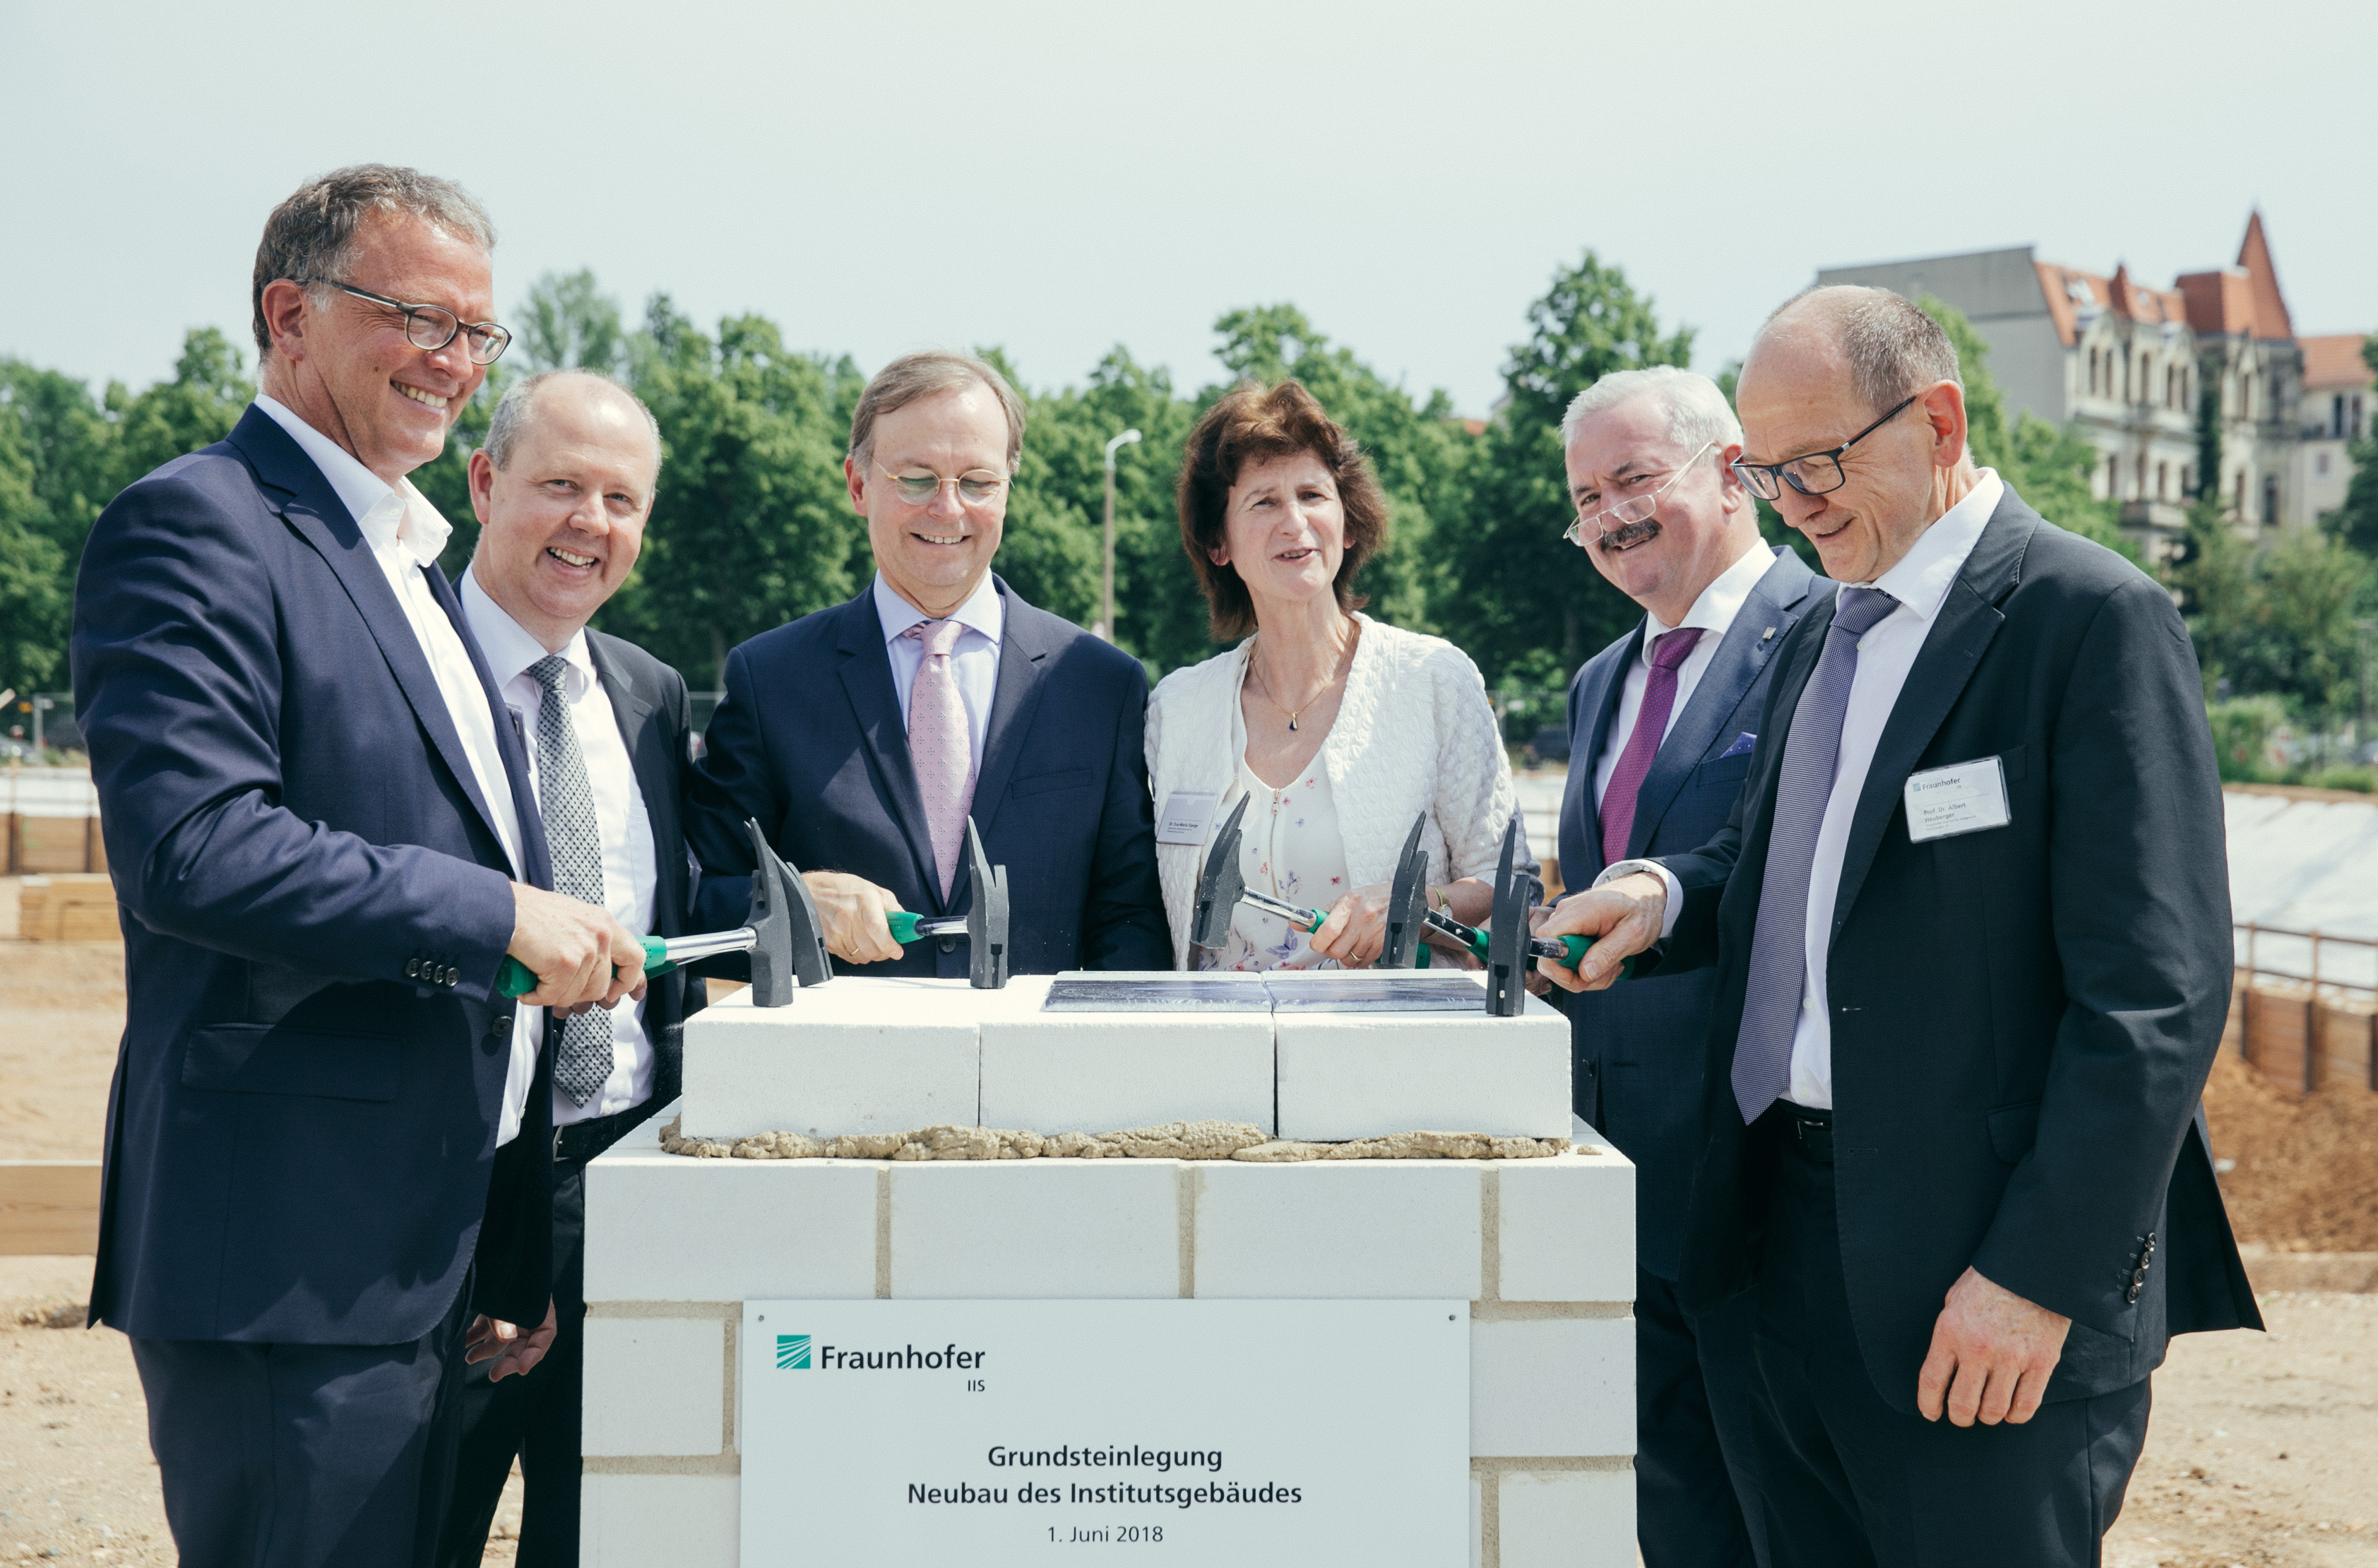 Thomas Heinle, Heinle, Wischer und Partner freelance architects, Dr Peter Schneider, director of the Fraunhofer Division EAS, Thomas Rachel, Parliamentary Secretary of State in the Federal Ministry of Education and Research, Dr Eva-Maria Stange, State Minister of Saxony for Science and Art, Prof. Dr Reimund Neugebauer, President of Fraunhofer-Gesellschaft, Prof. Dr Albert Heuberger, Executive Director of Fraunhofer IIS (from left to right)